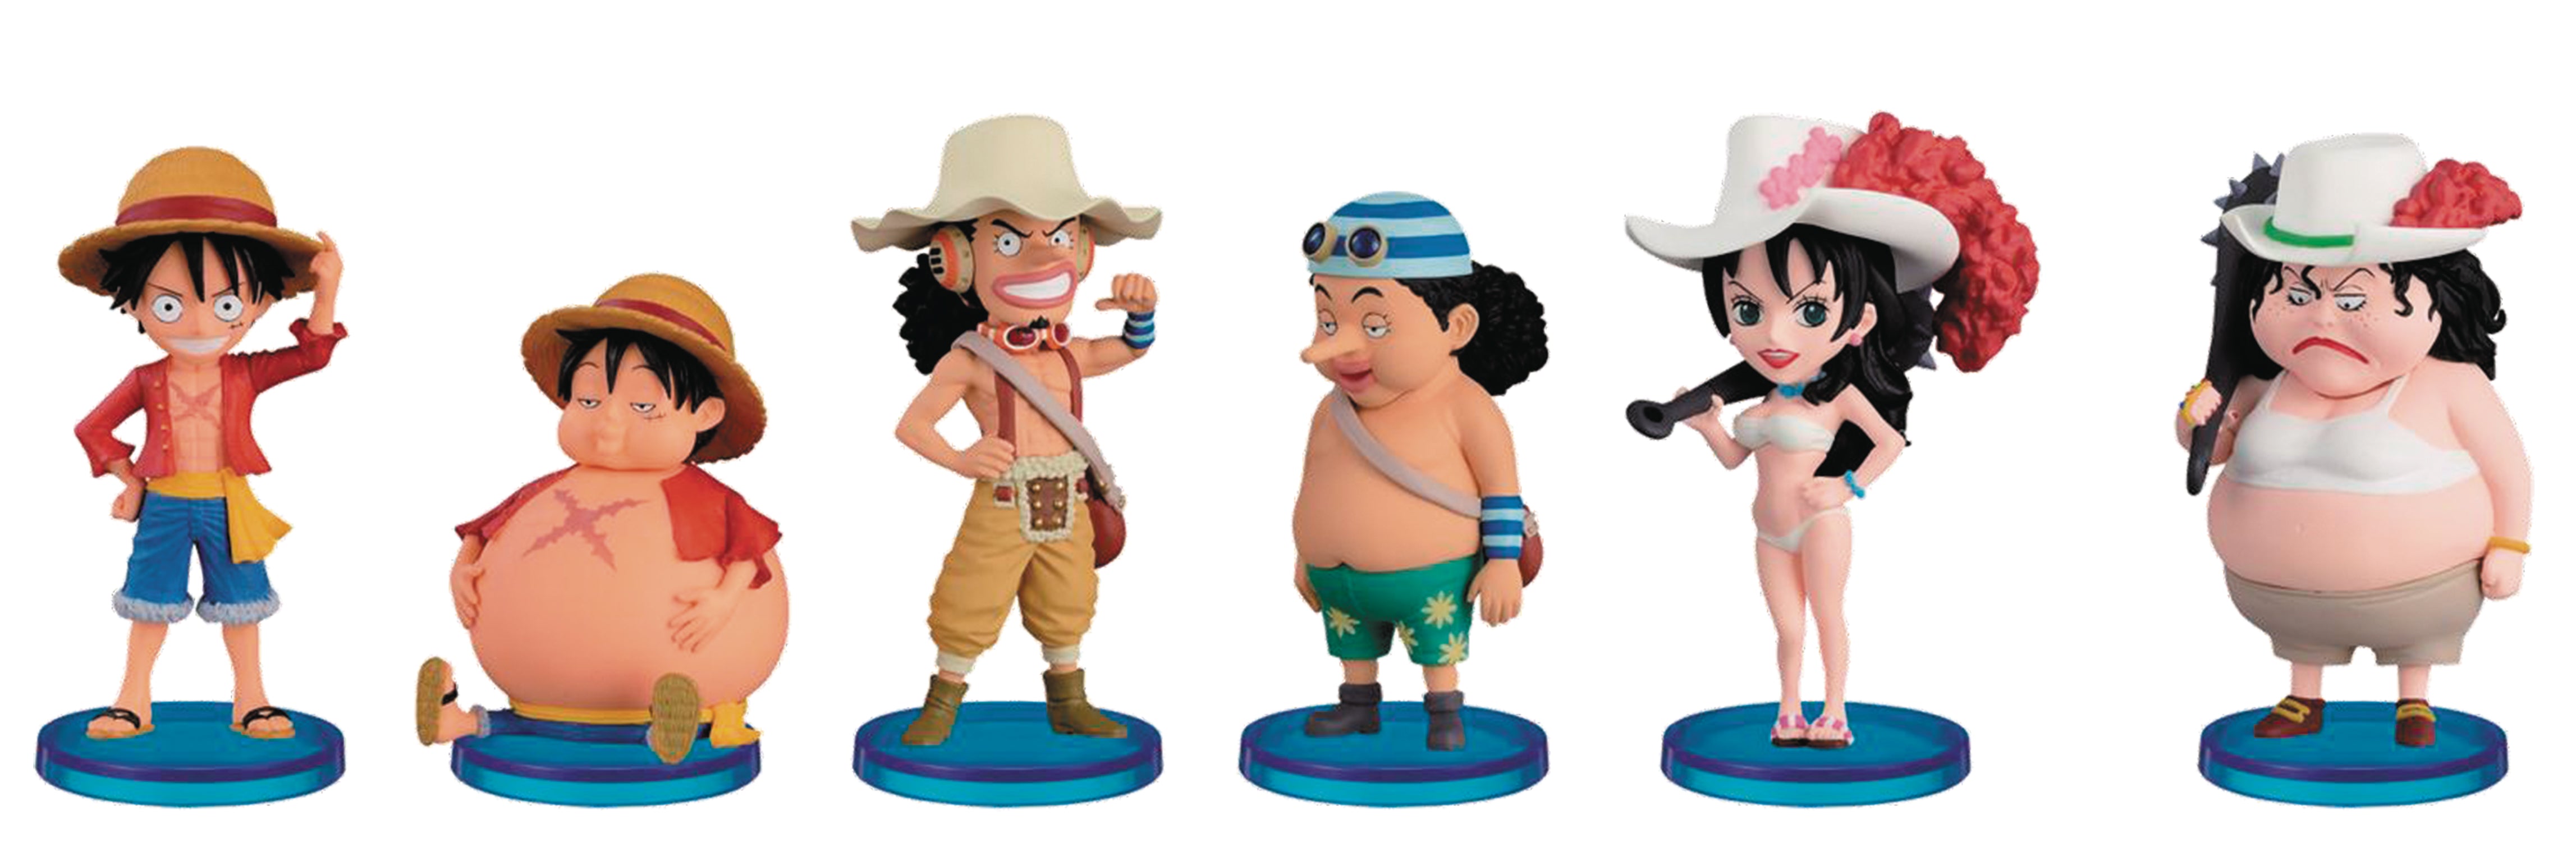 One Piece World Collectible Figure - WCF - Before and After Series